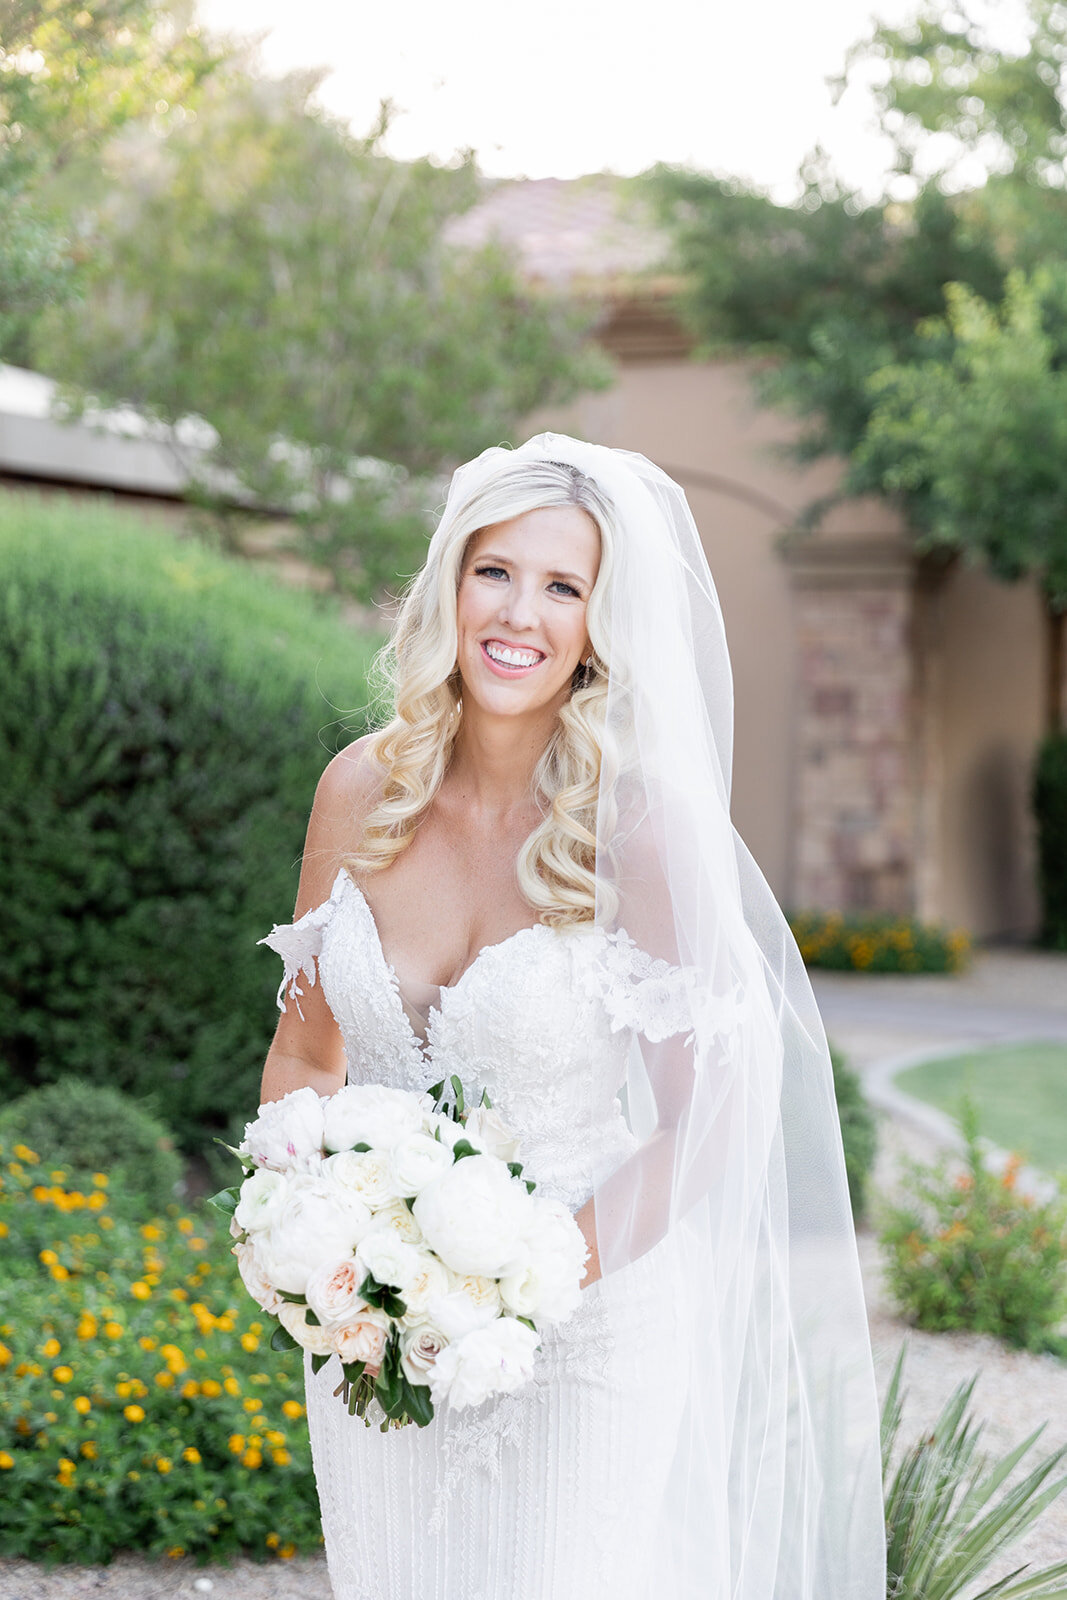 Karlie Colleen Photography - Holly & Ronnie Wedding - Seville Country Club - Gilbert Arizona-663